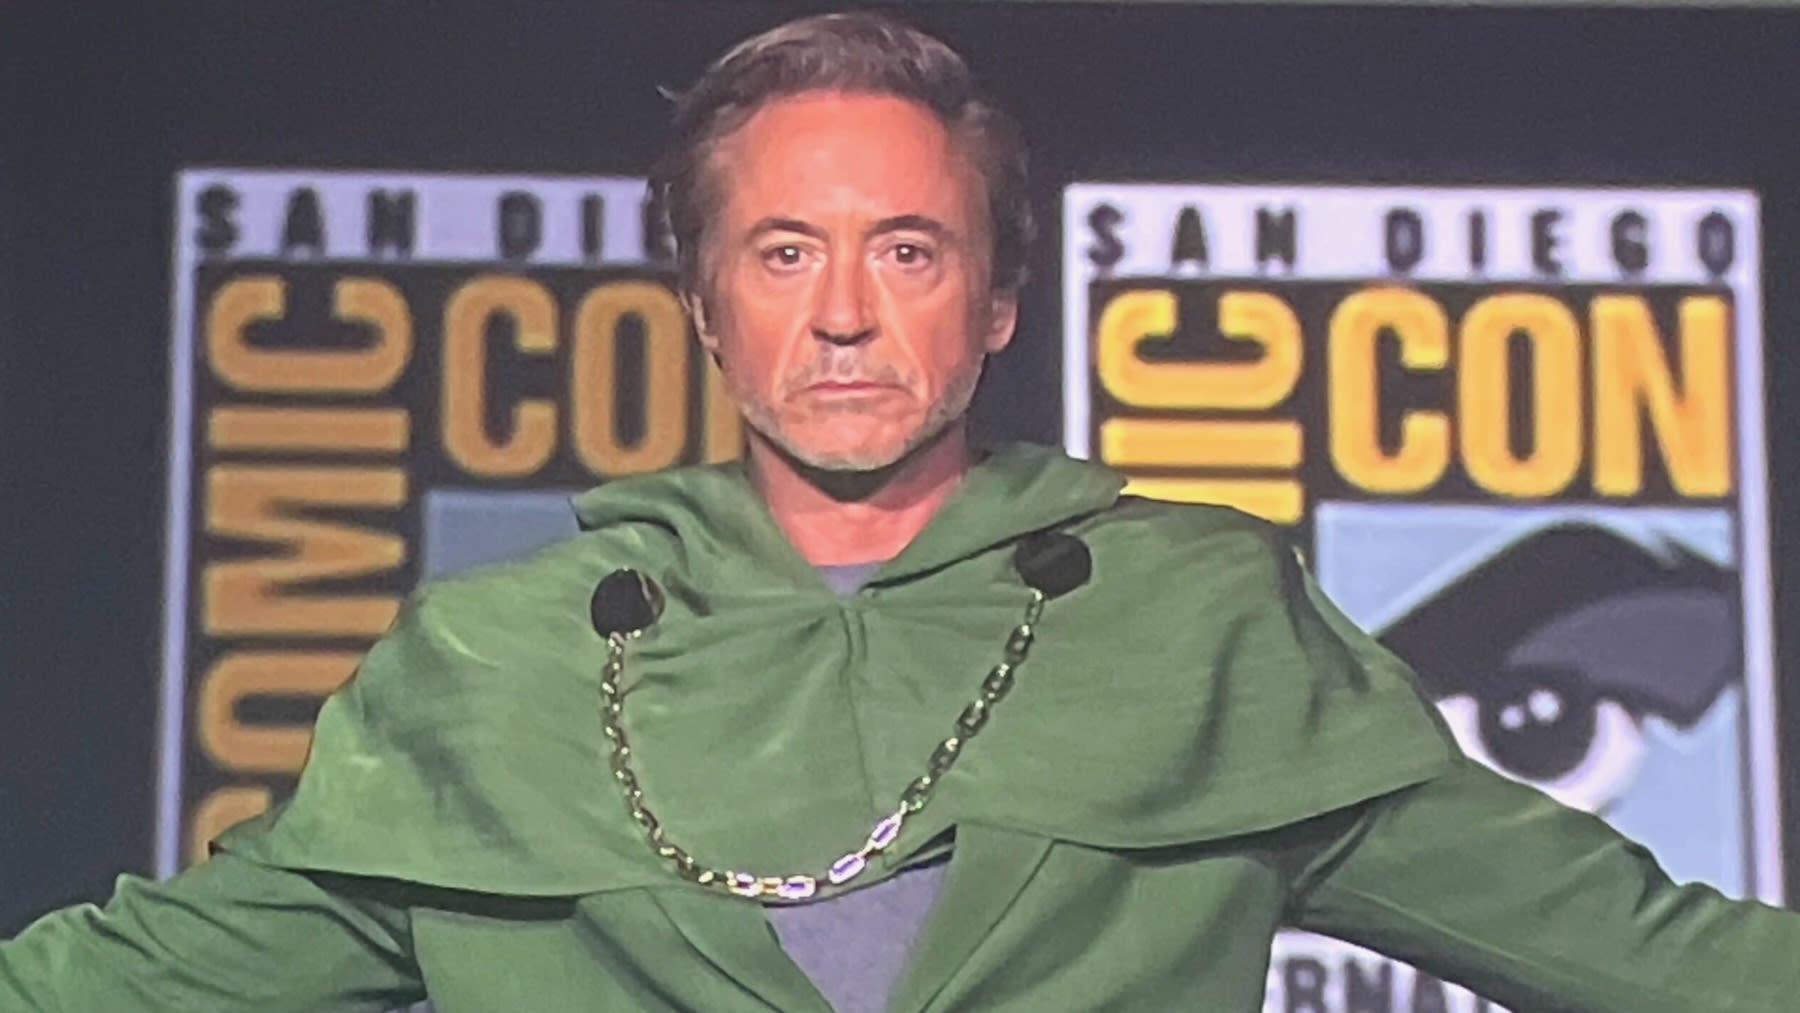 Robert Downey Jr. Returning to MCU to Play Dr. Doom in New Avengers Movie